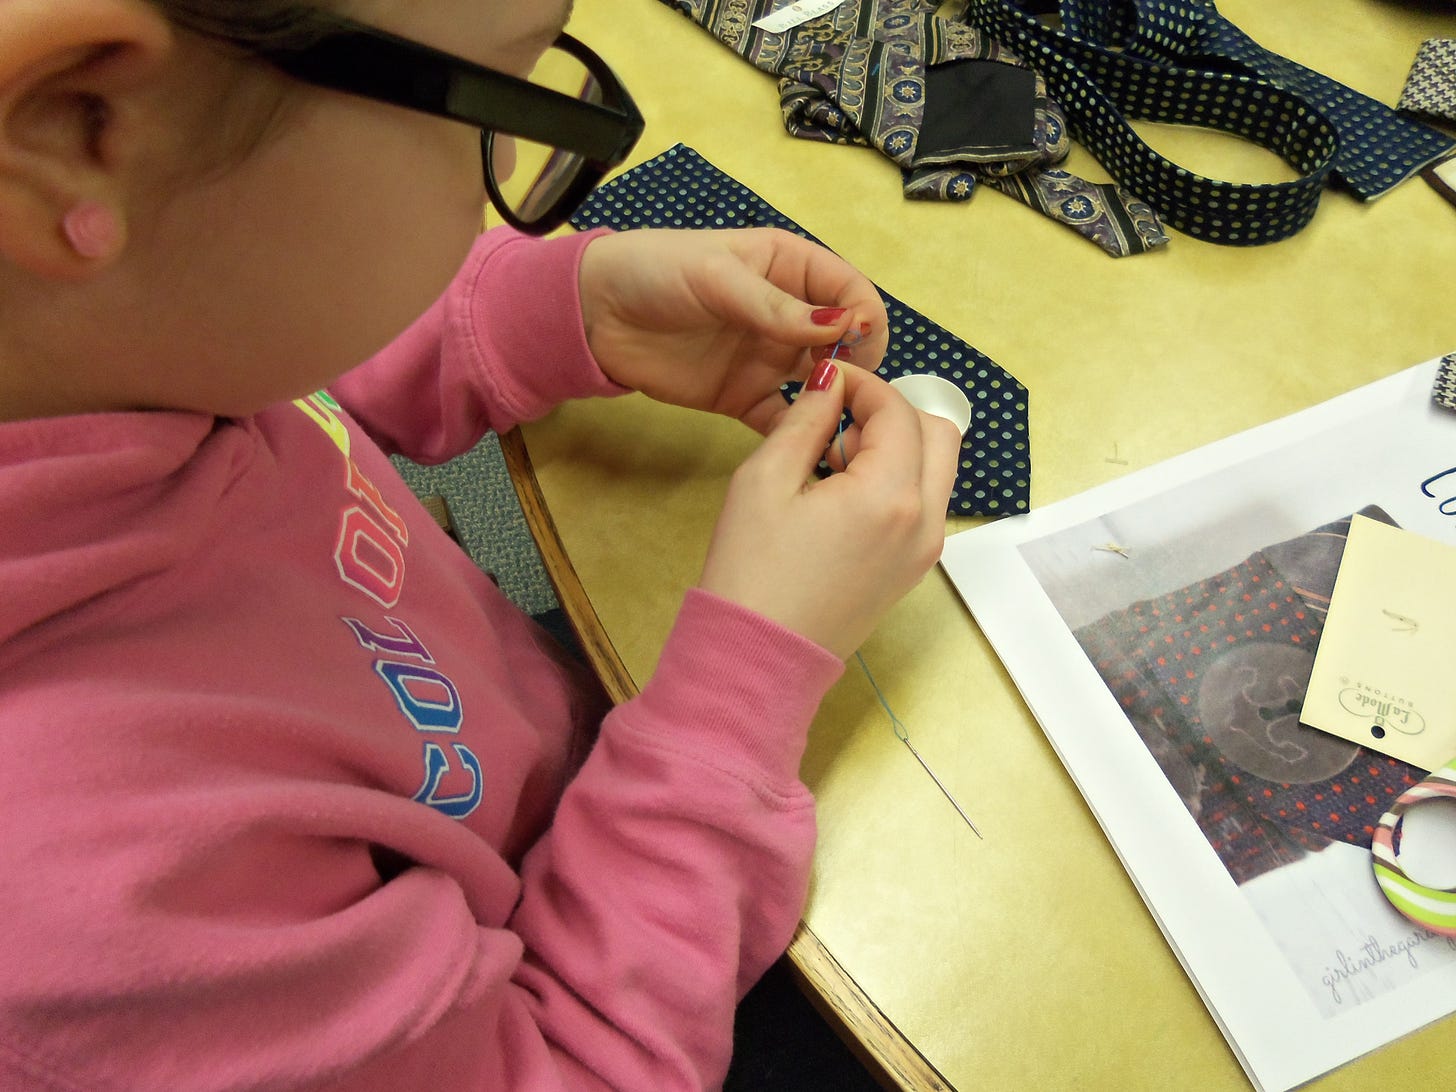 A young visitor works on a sewing project at a table in a library makerspace.